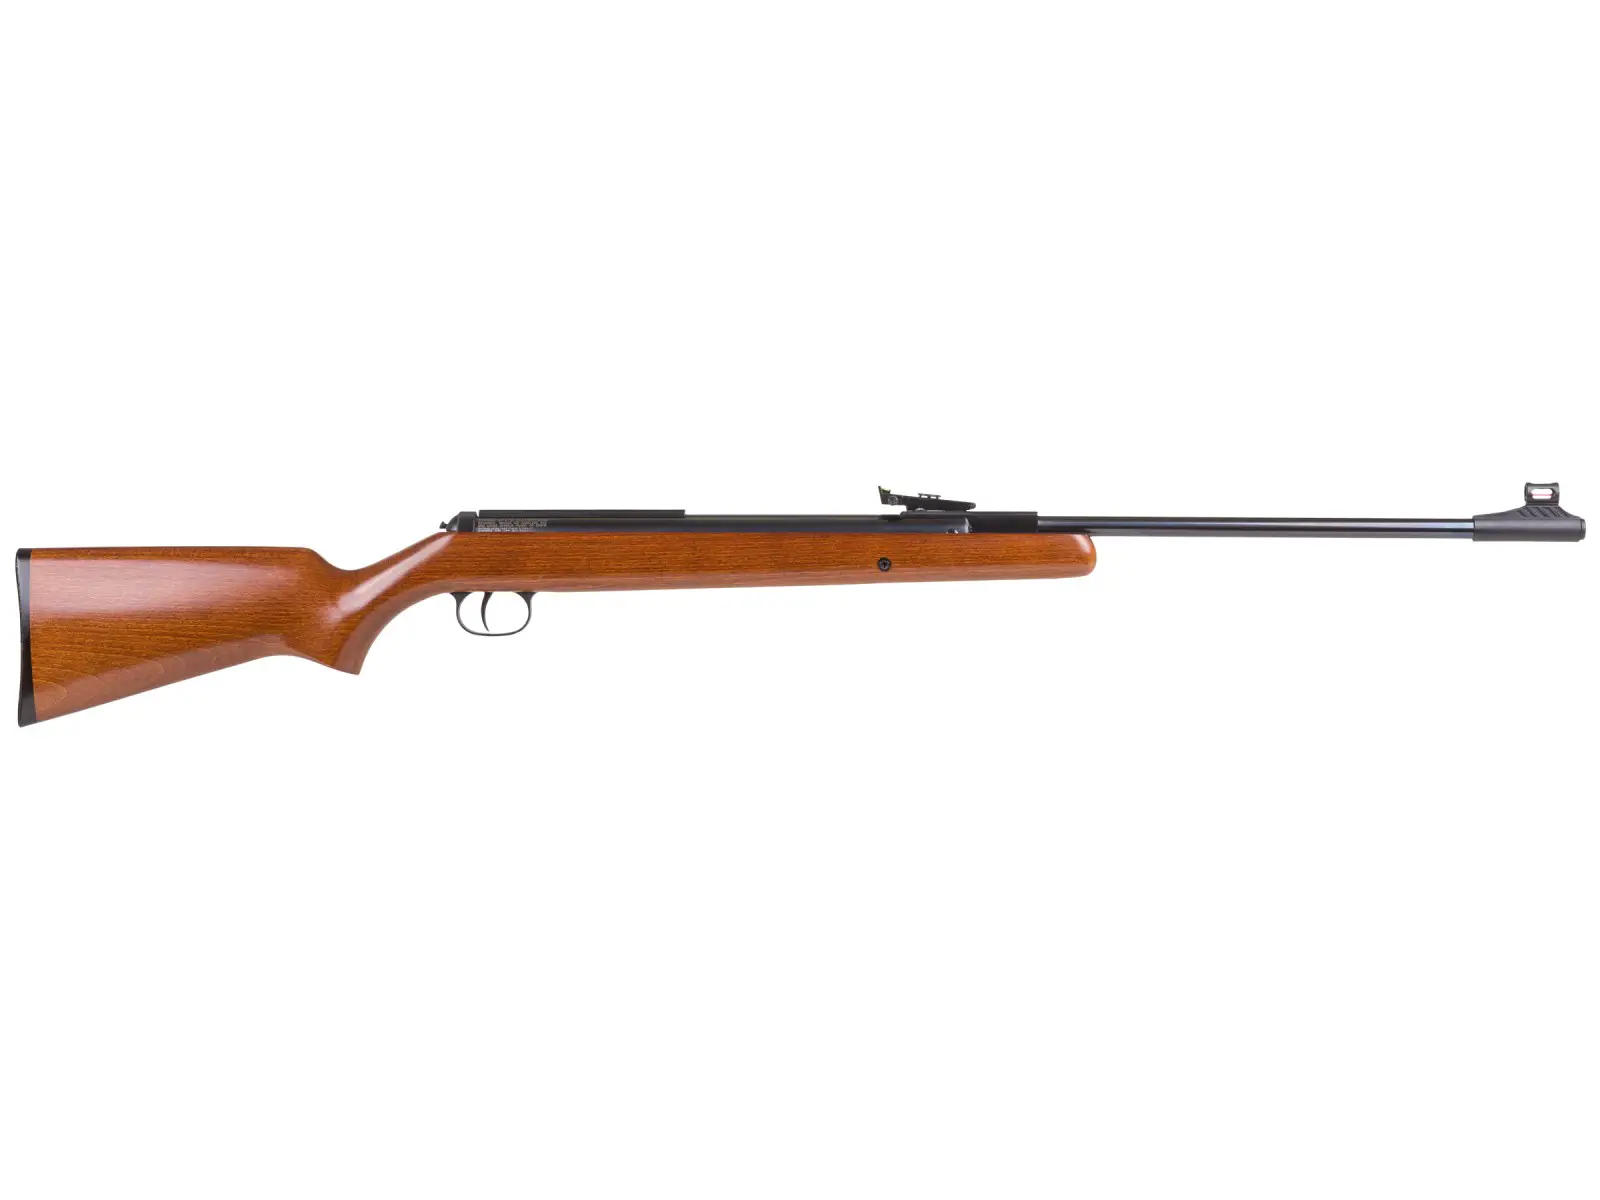 rws34 Best Air Rifles for Hunting (Reviews and Buying Guide 2022)